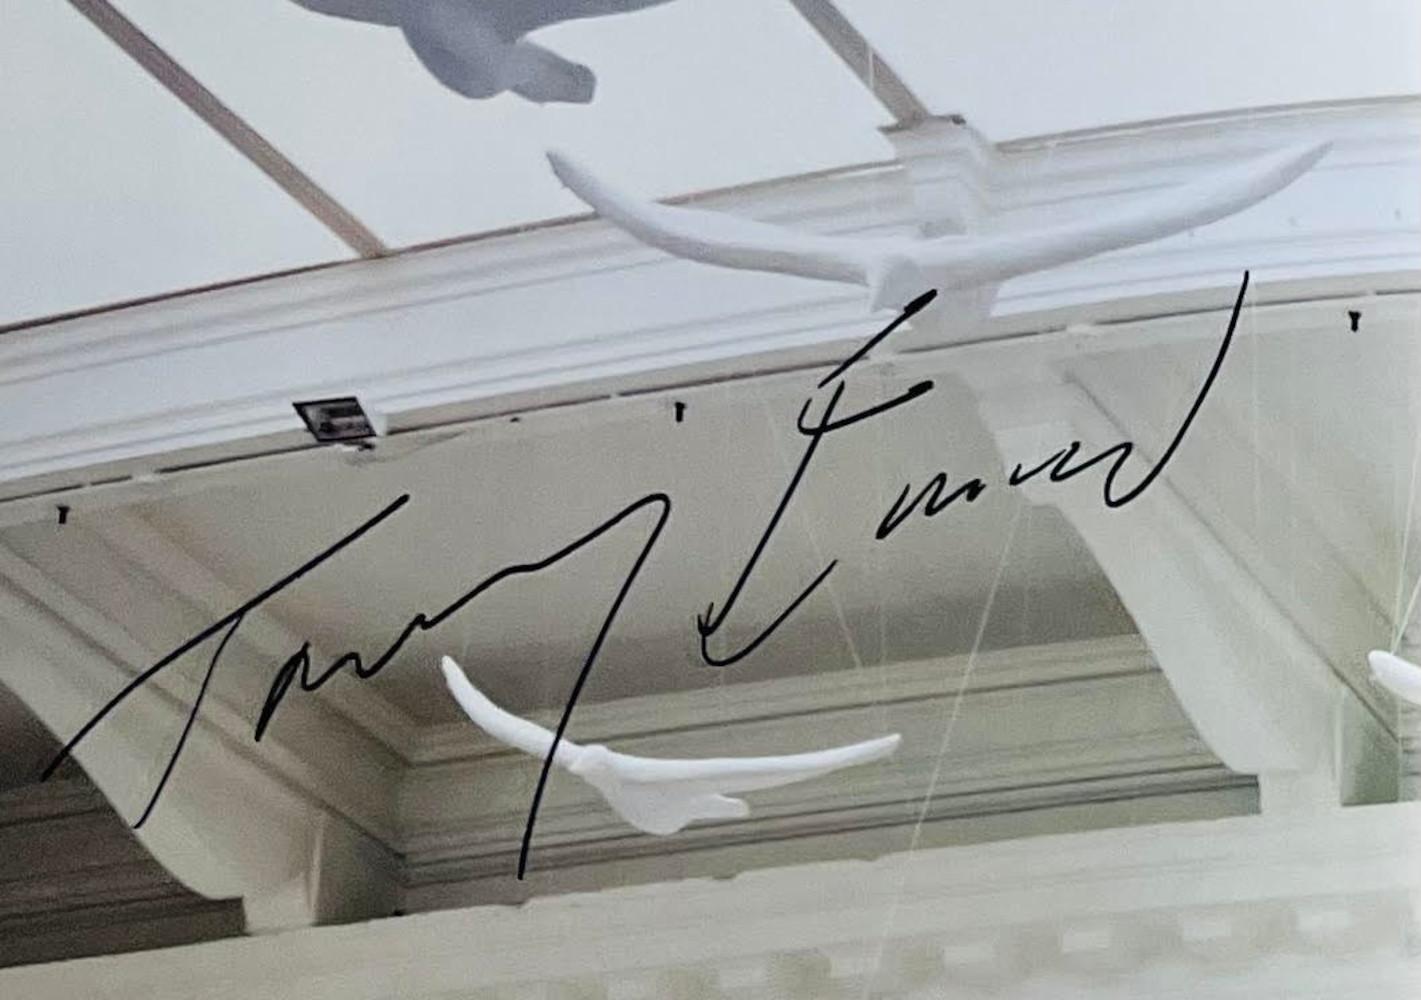 Tracey Emin
I Need Art Like I Need God (Hand signed by Tracey Emin), 1998
Softback monograph with stiff wraps (Hand signed by Tracey Emin)
Hand signed in black ink by Tracey Emin on the title page
11 3/4 × 8 1/2 × 1/2 inches
Hand signed in ink by